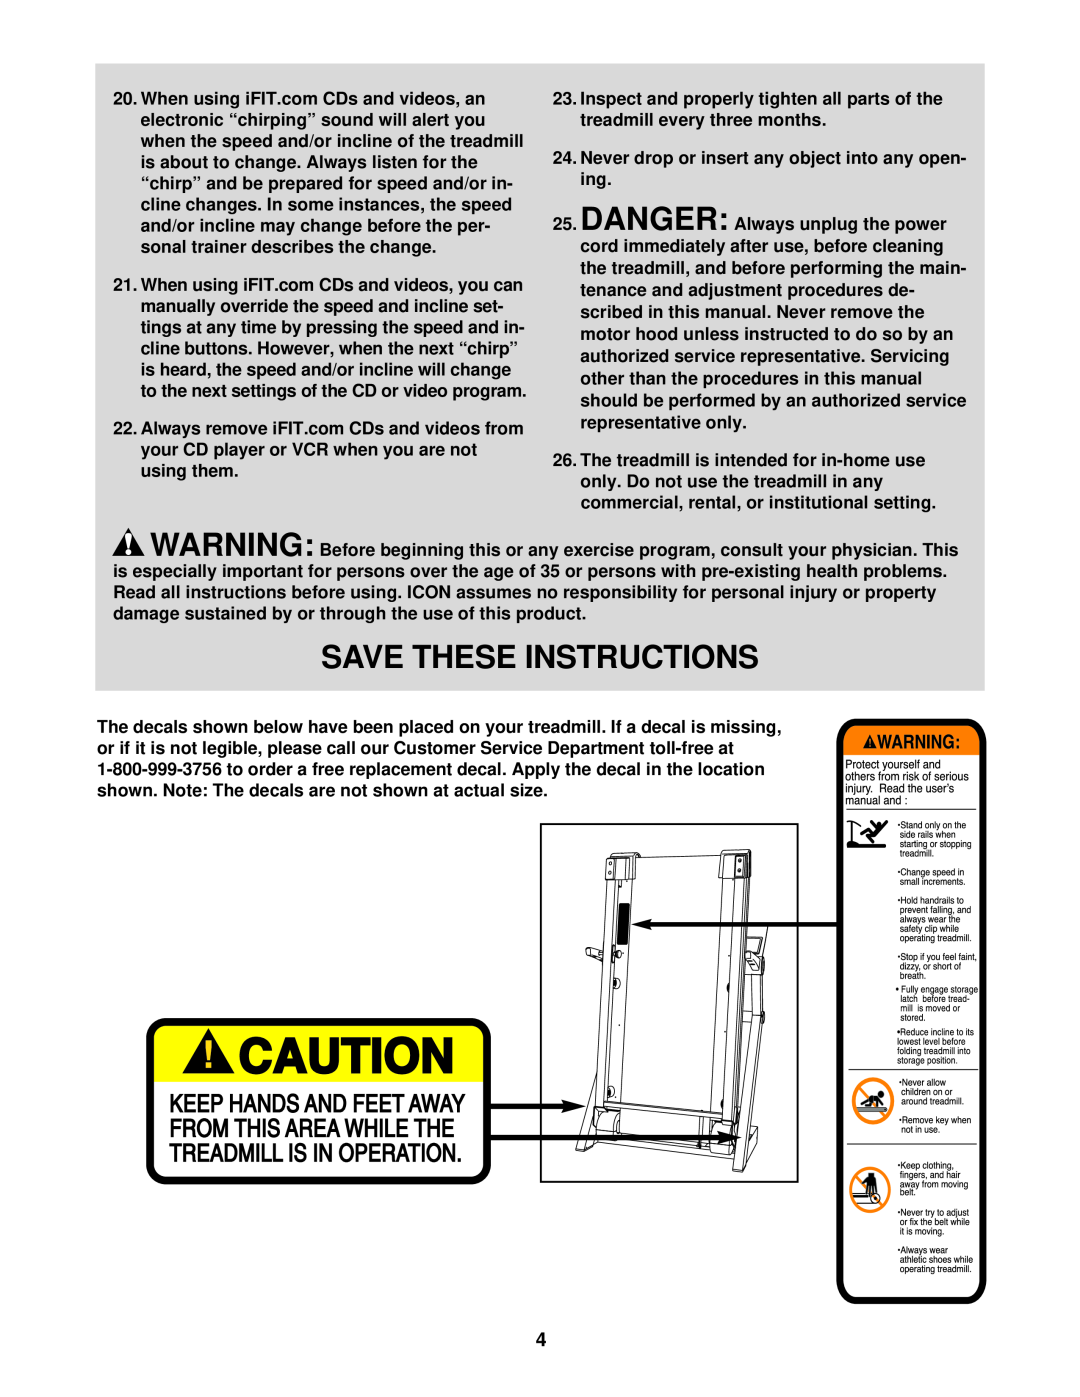 ProForm PFTL91330 user manual Save These Instructions, Never drop or insert any object into any open- ing 